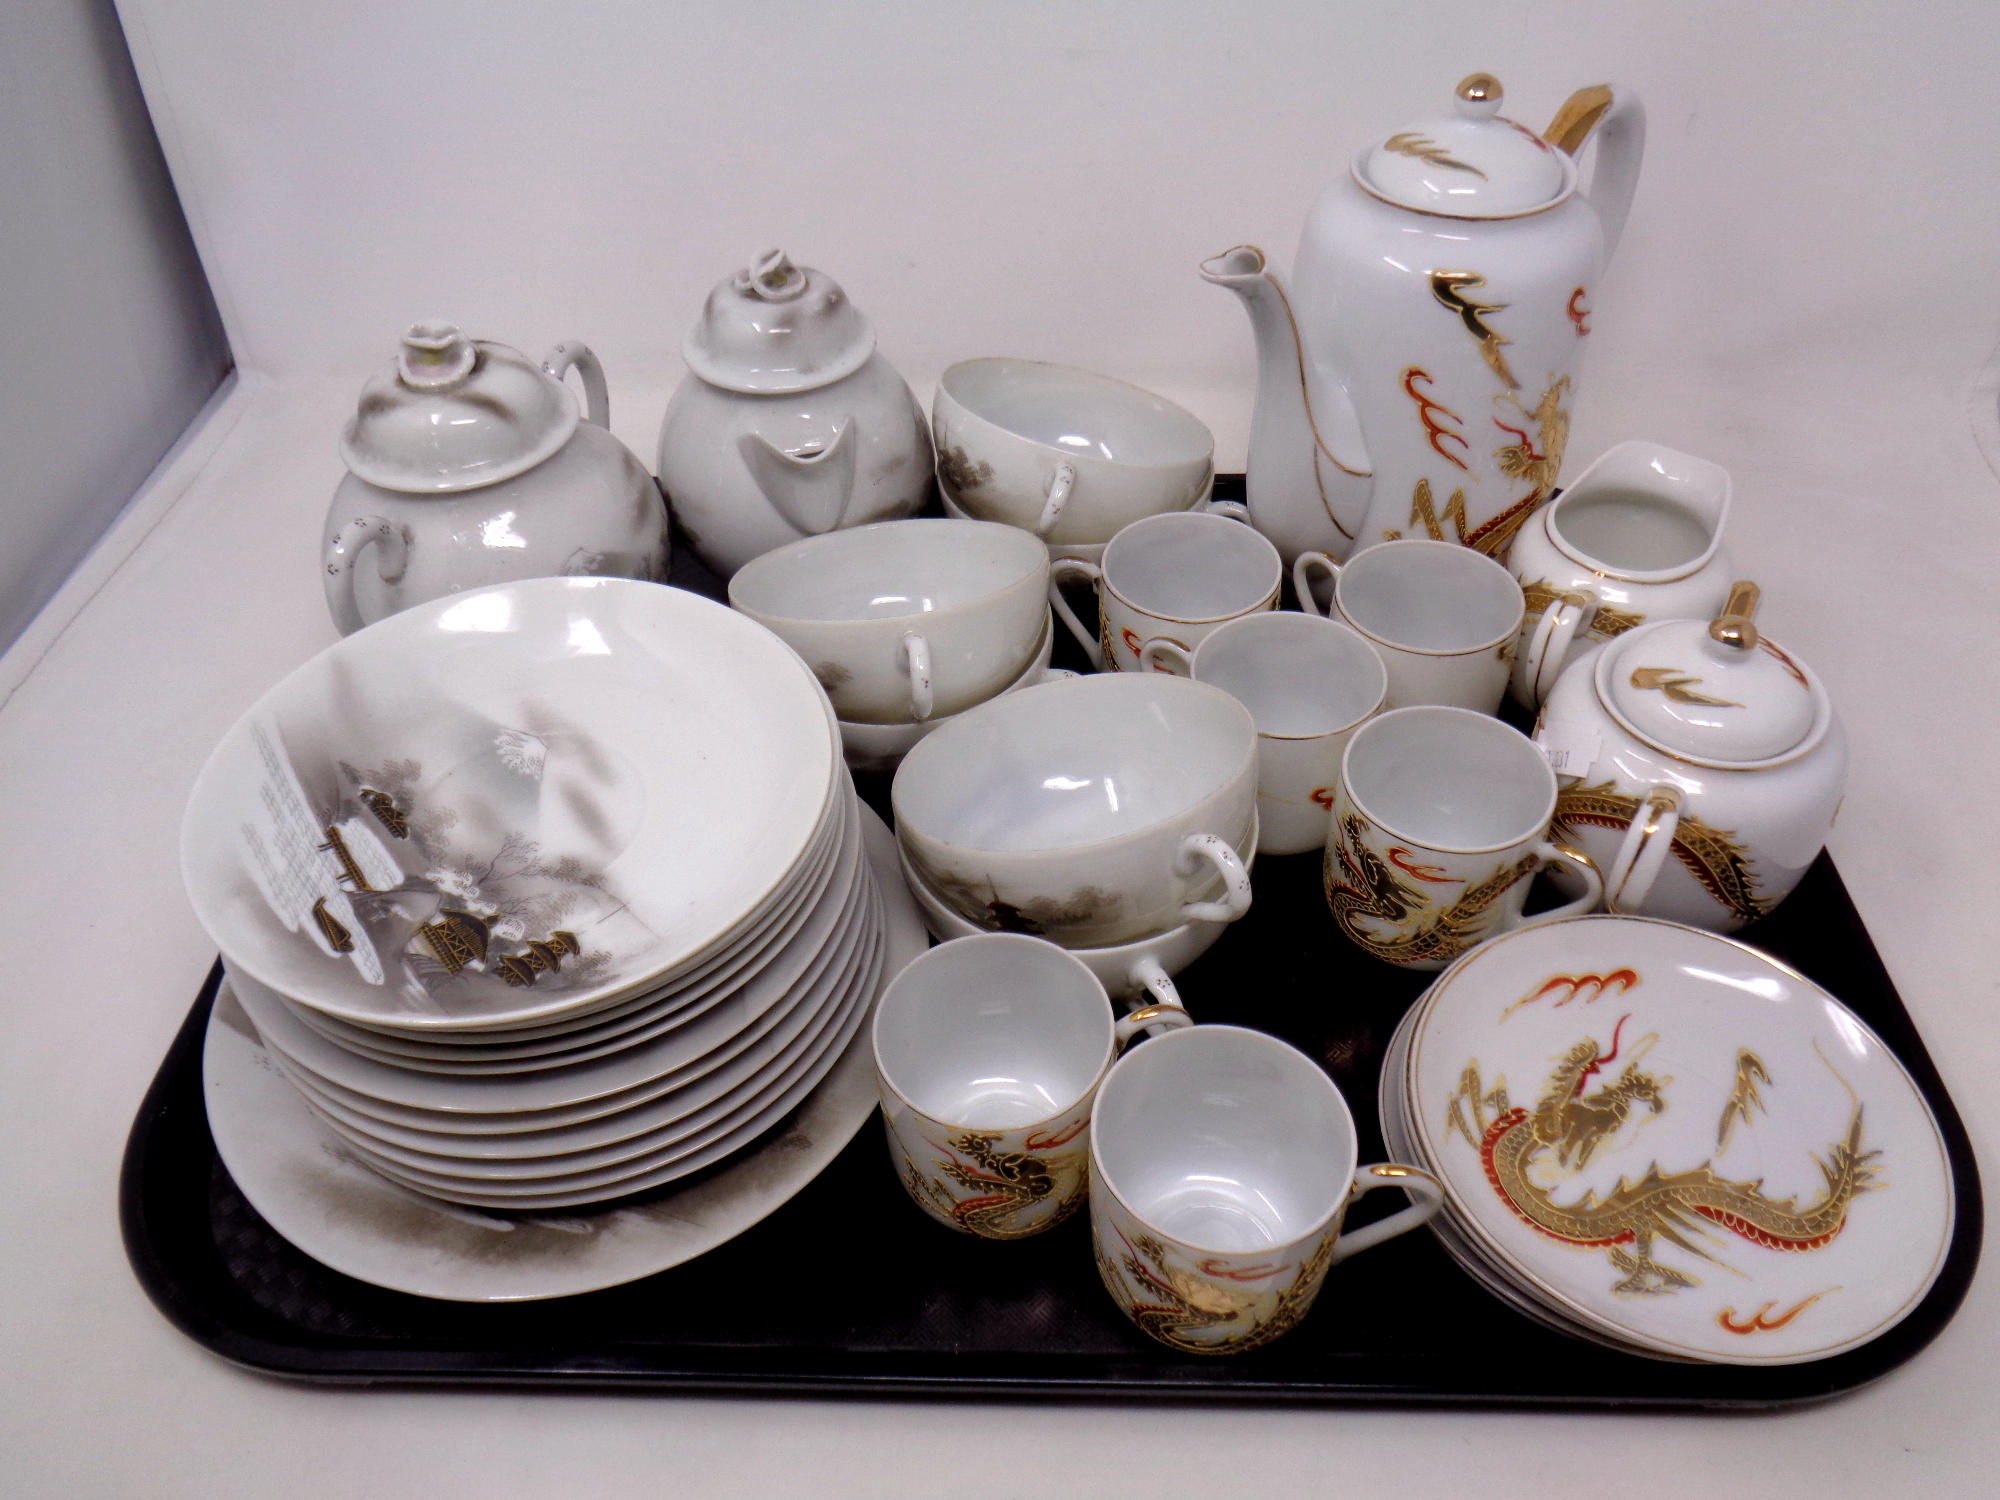 A tray of two Japanese eggshell tea services